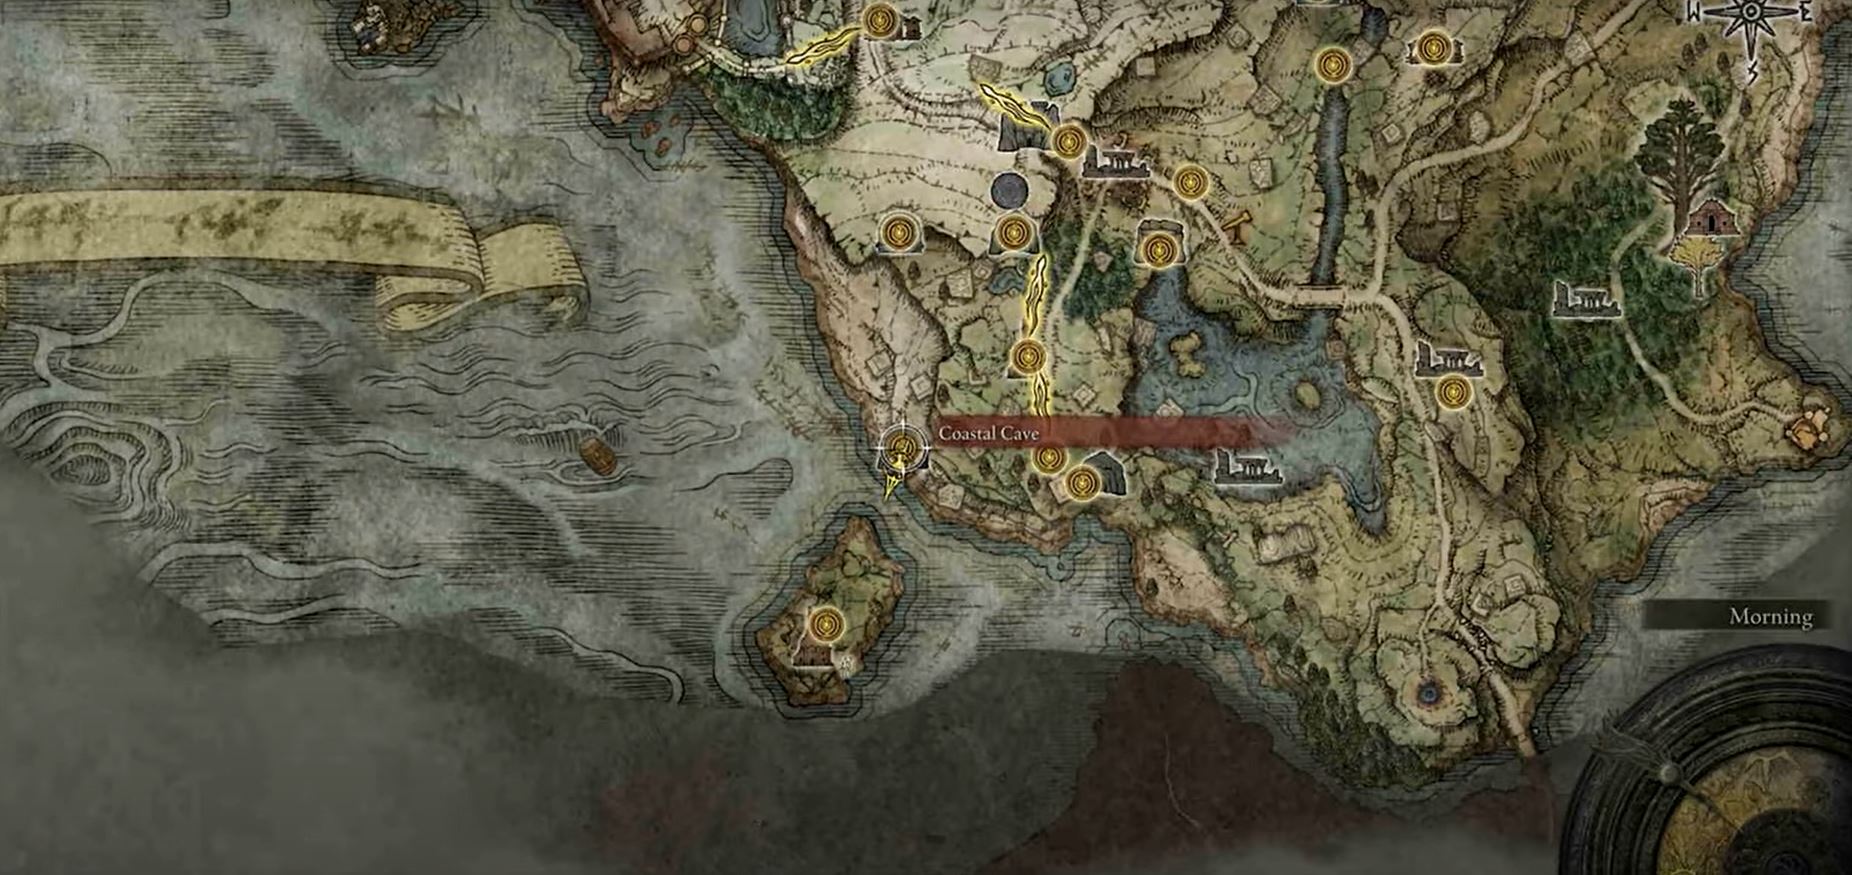 Elden Ring Rivers of Blood Build Coastal Cave Location 